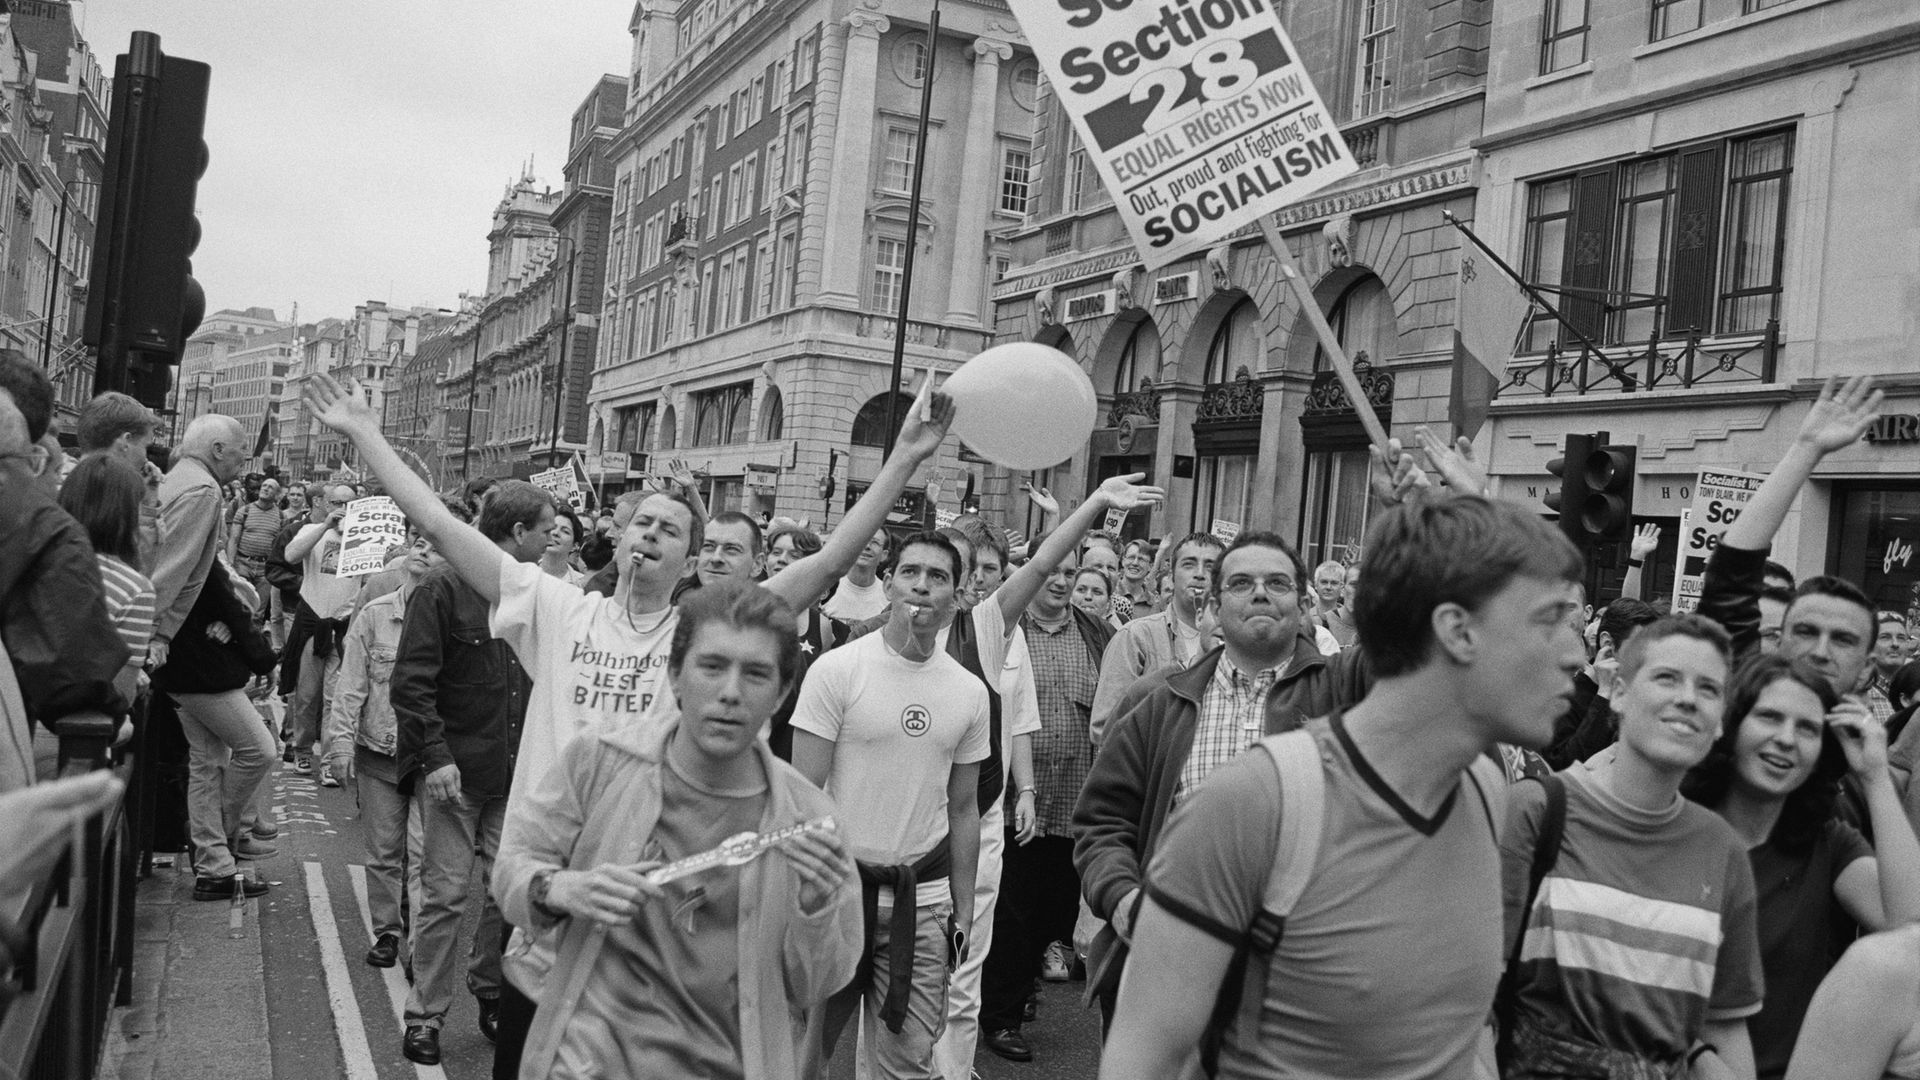 Protestors against Section 28, during an LGBT Pride event in London, in July 1998 - Credit: Getty Images